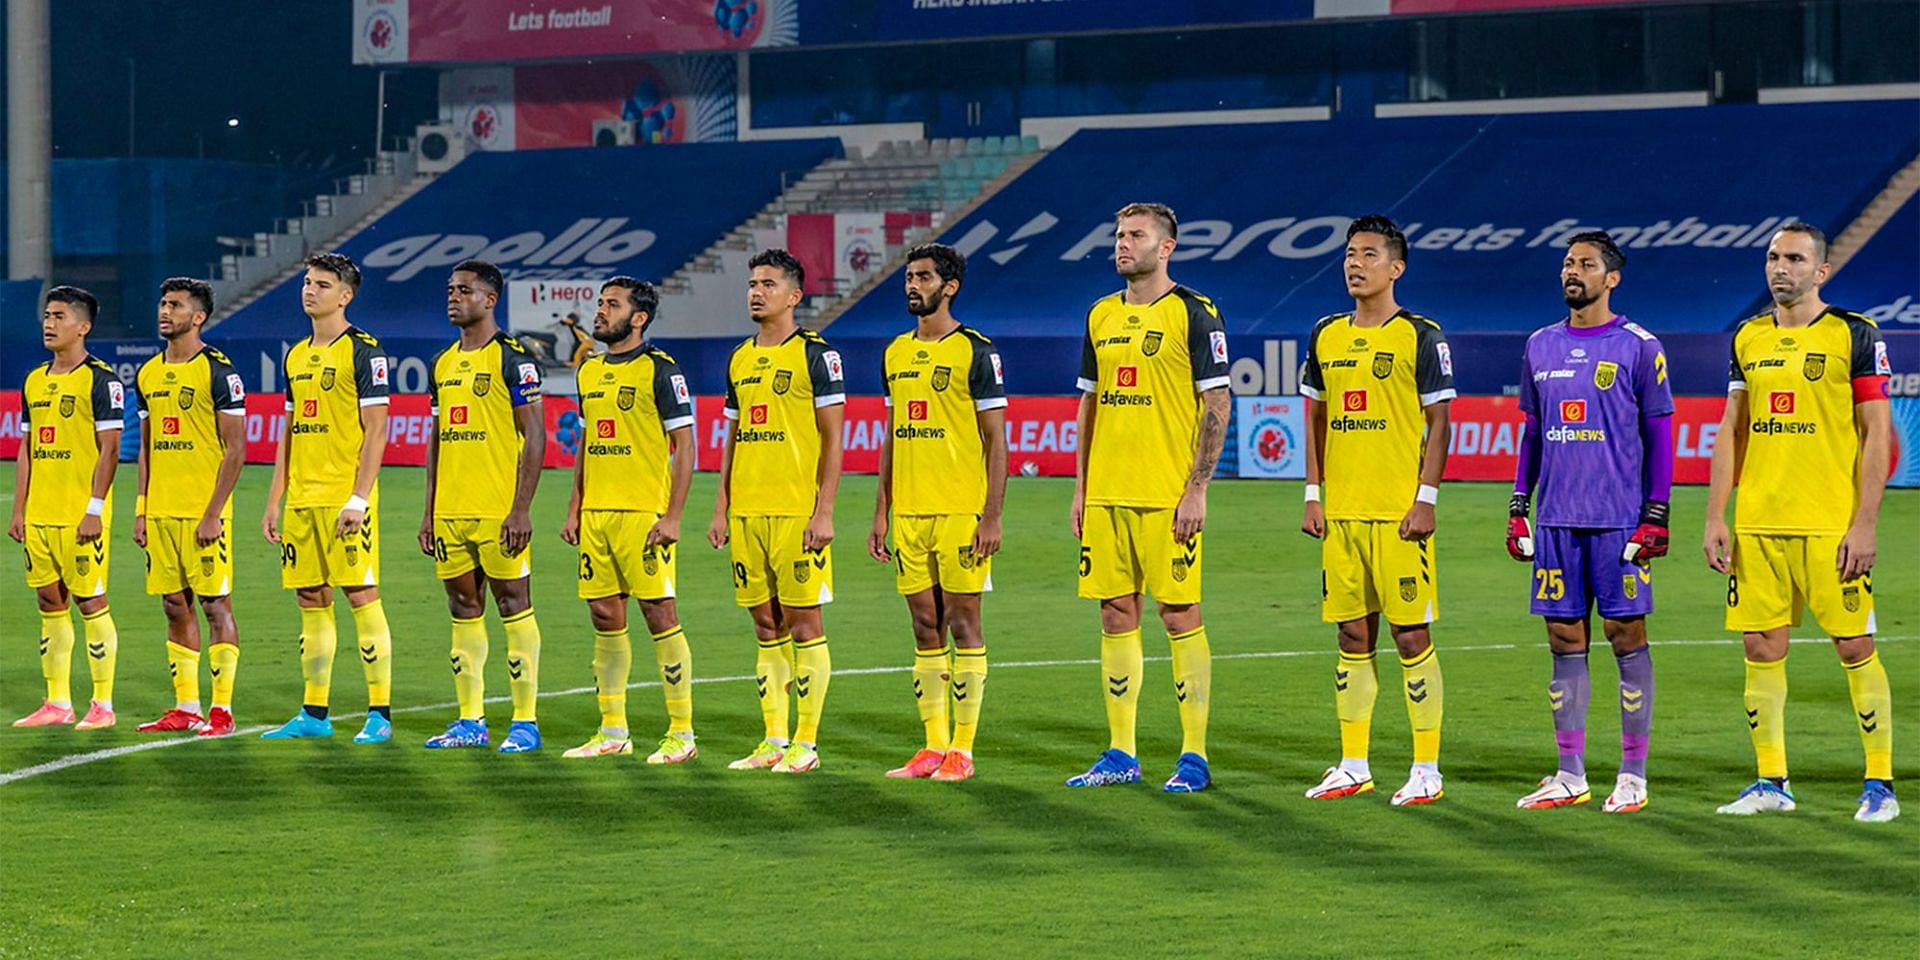 Hyderabad FC are hoping to continue their unbeaten run.